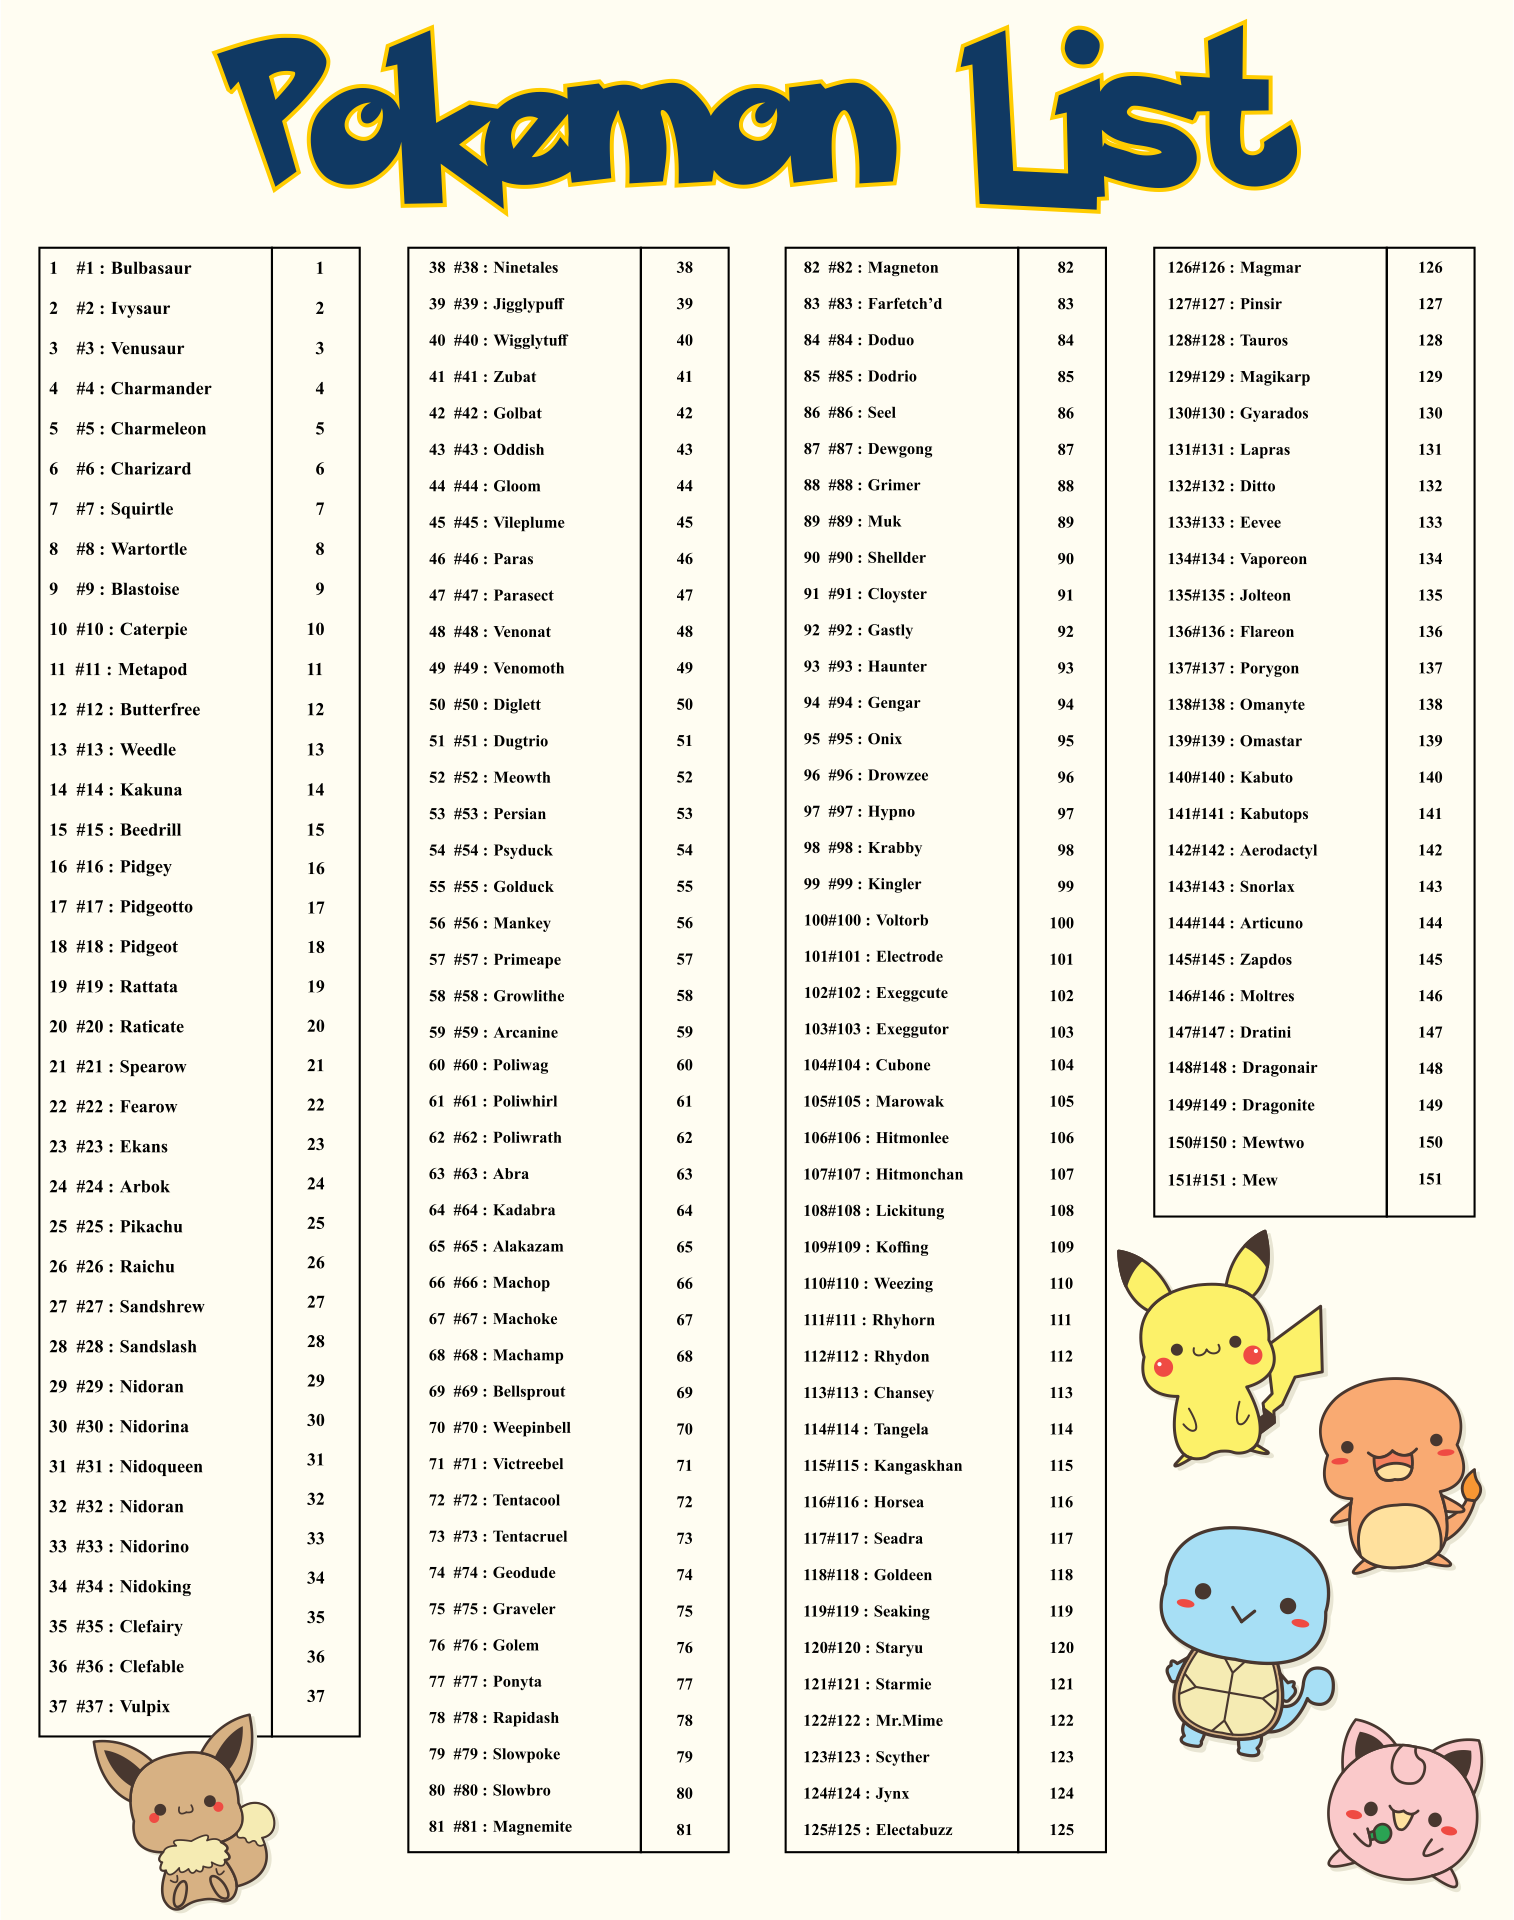 Complete List of All Pokemon Characters